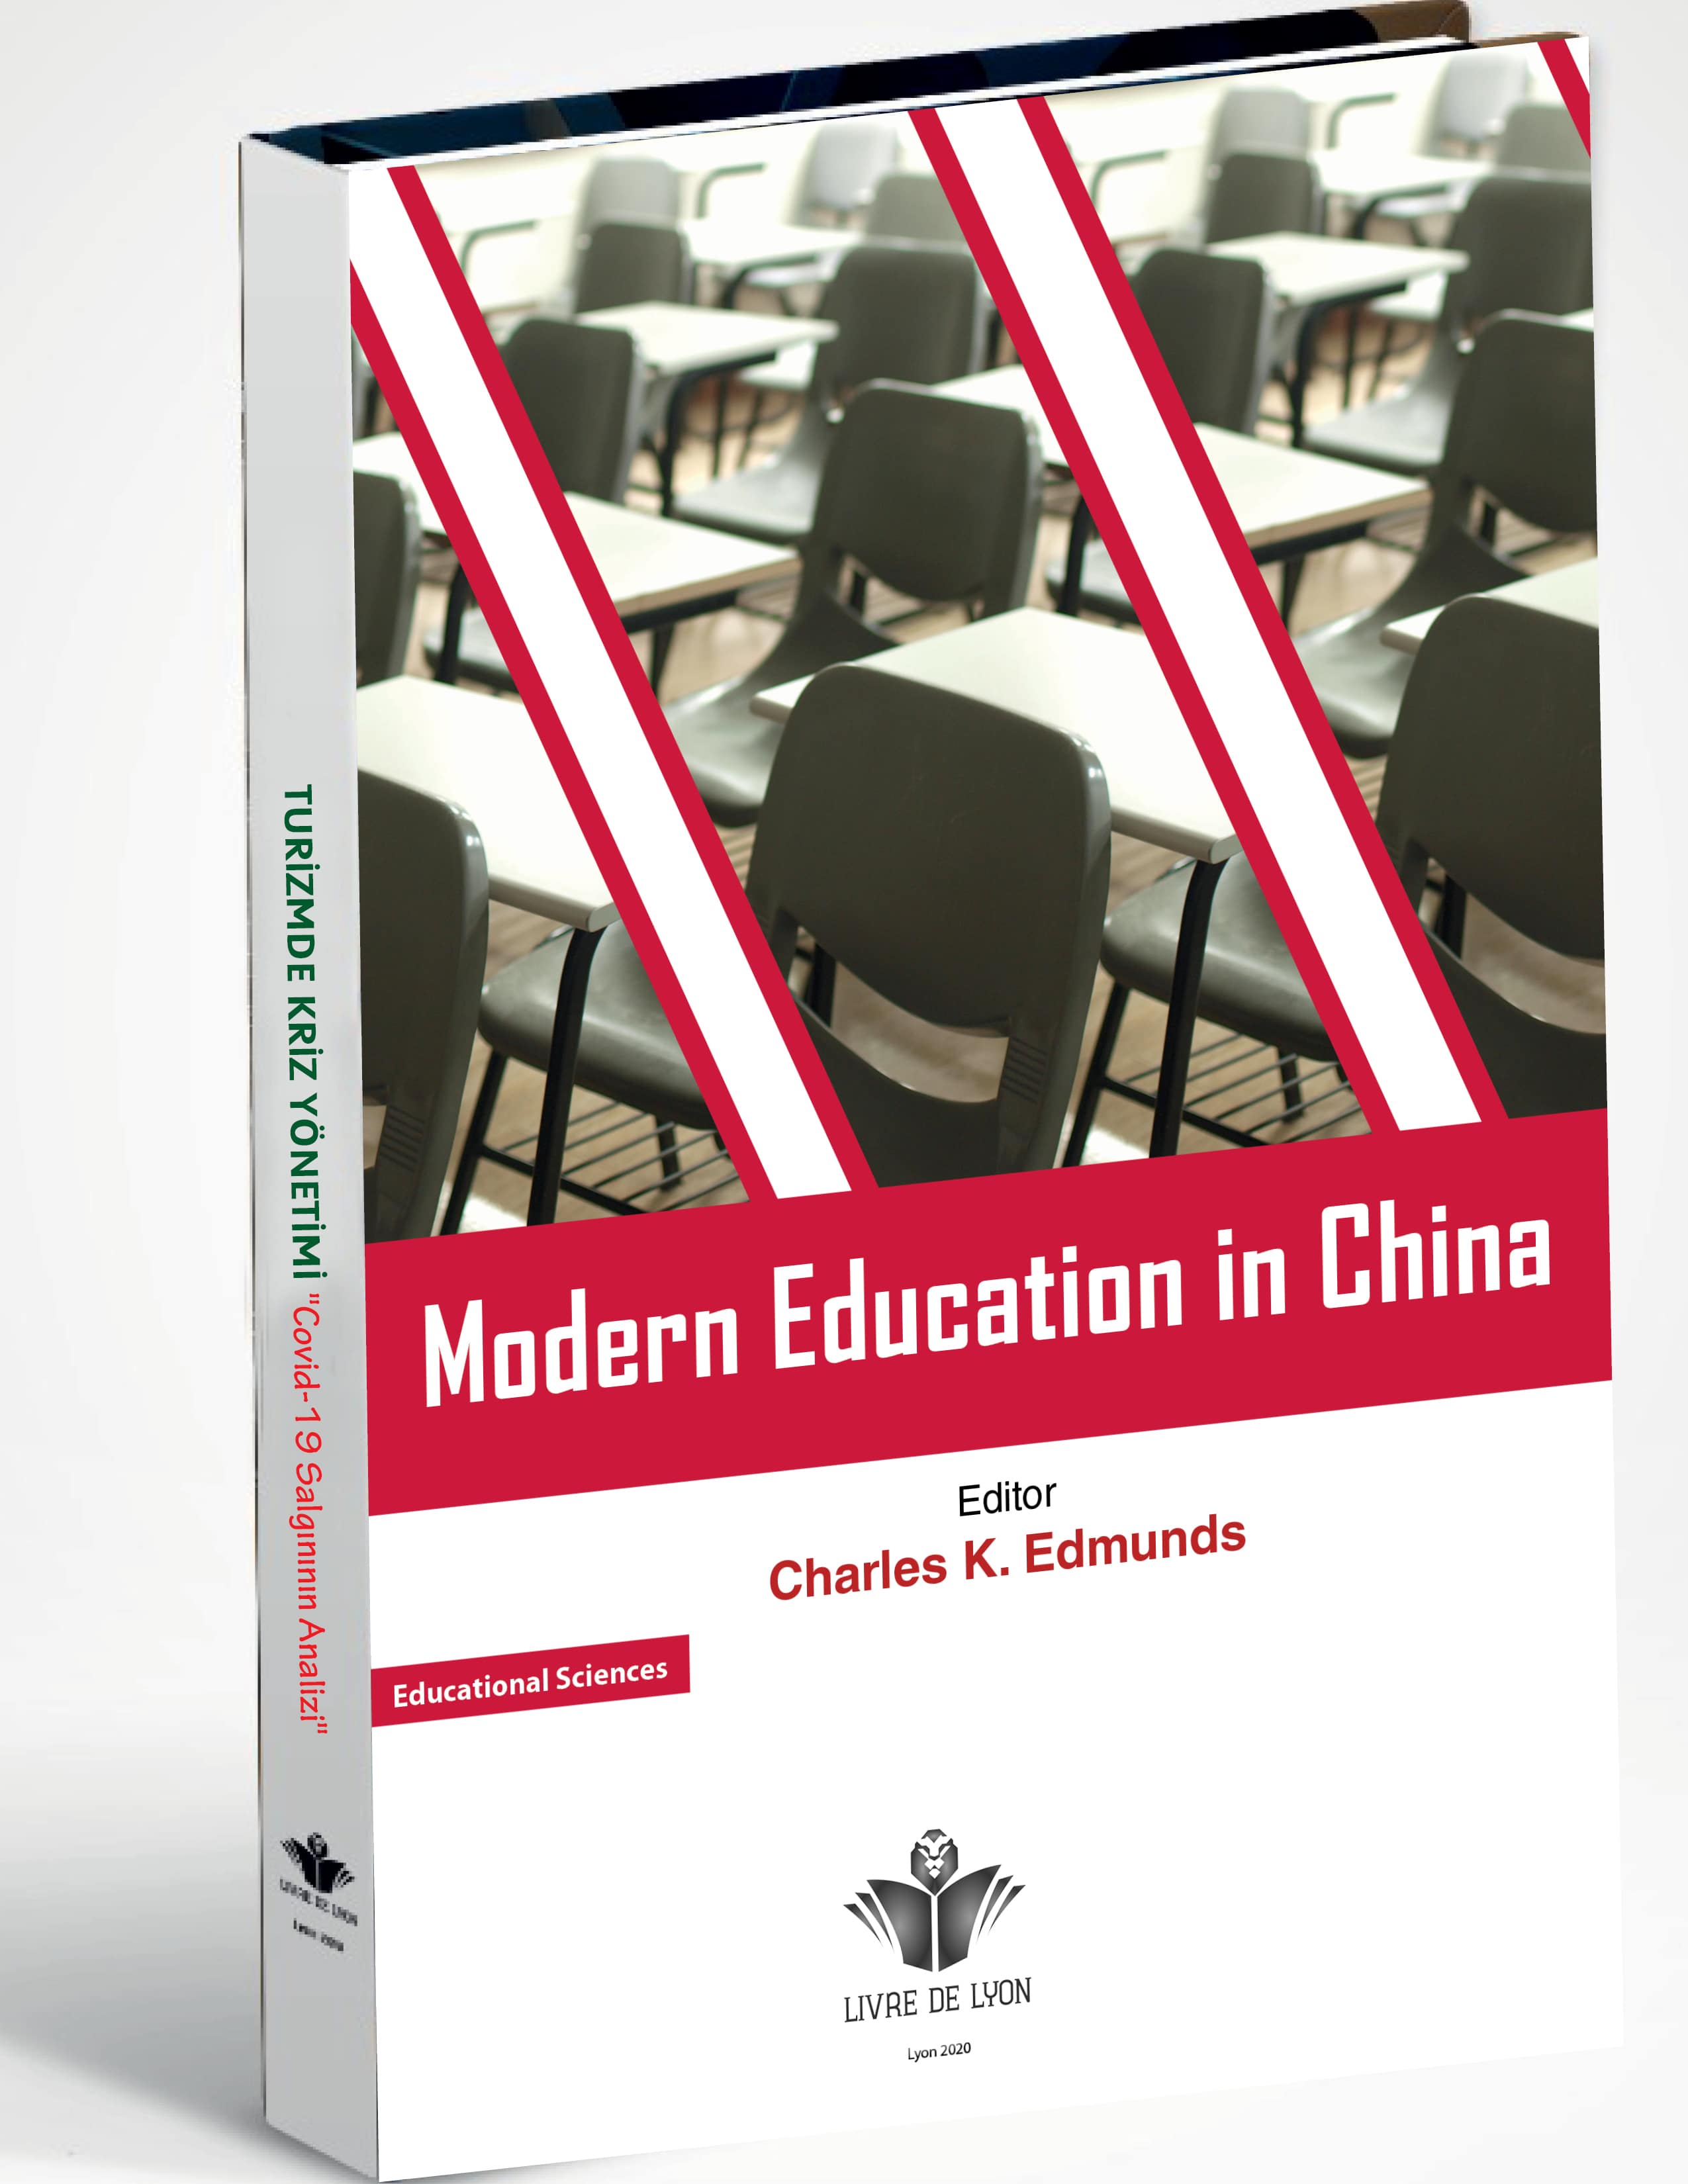 Modern Education in China